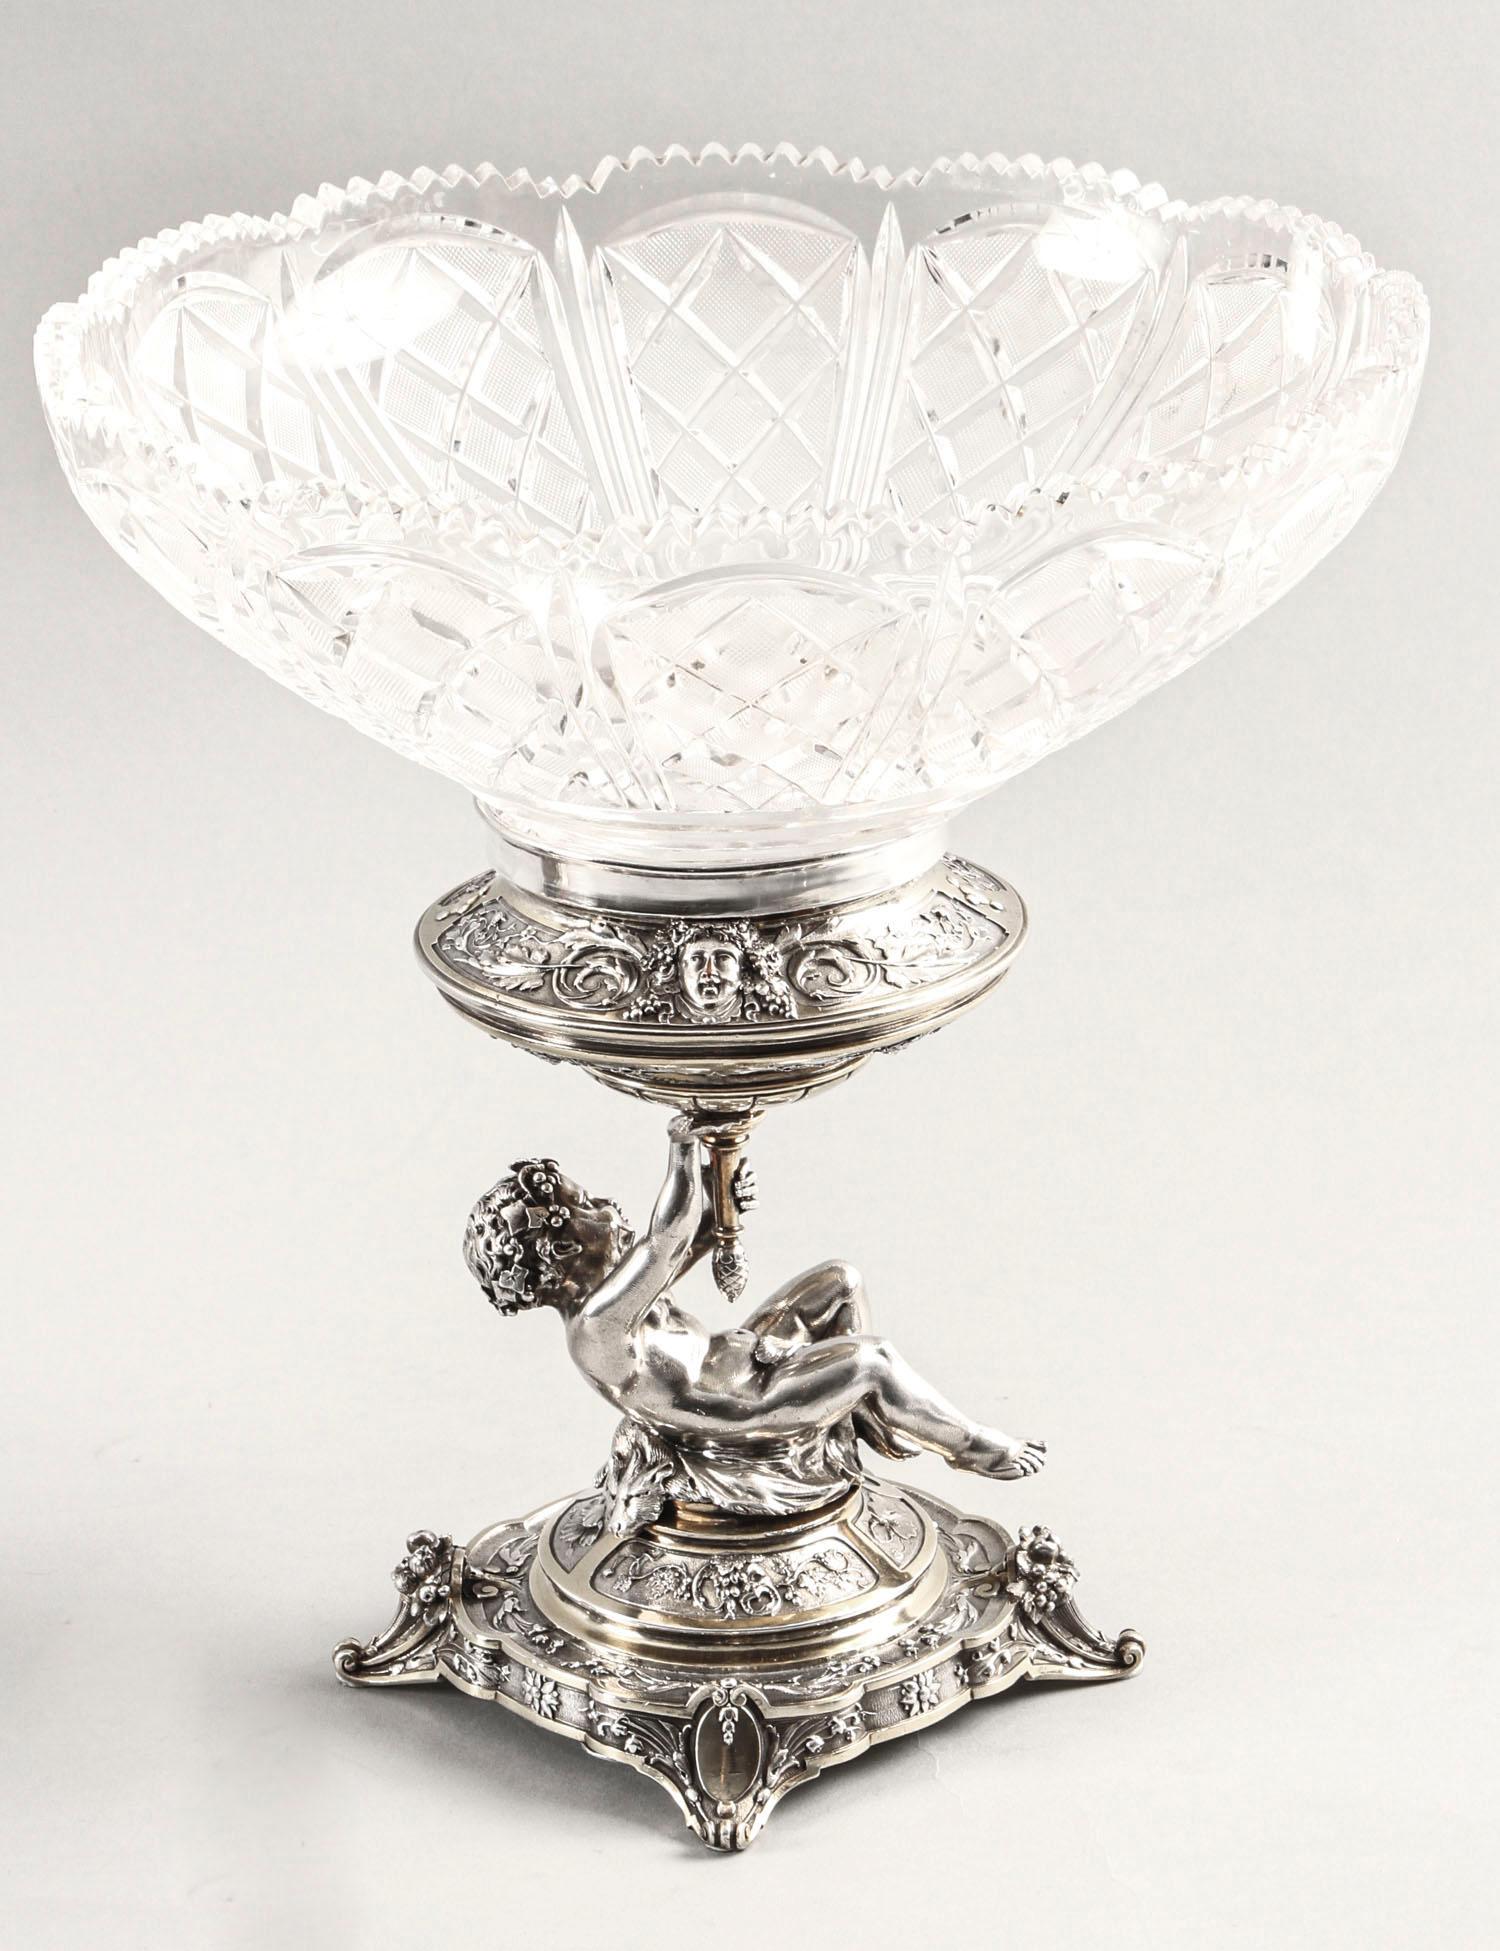 This is an intricate and exquisitely made antique pair of English Victorian parcel gilt silver plated and cut glass centrepieces by the renowned silversmiths Elkington & Co., dated 1883.

Each of these stunning centrepieces has a wonderful central